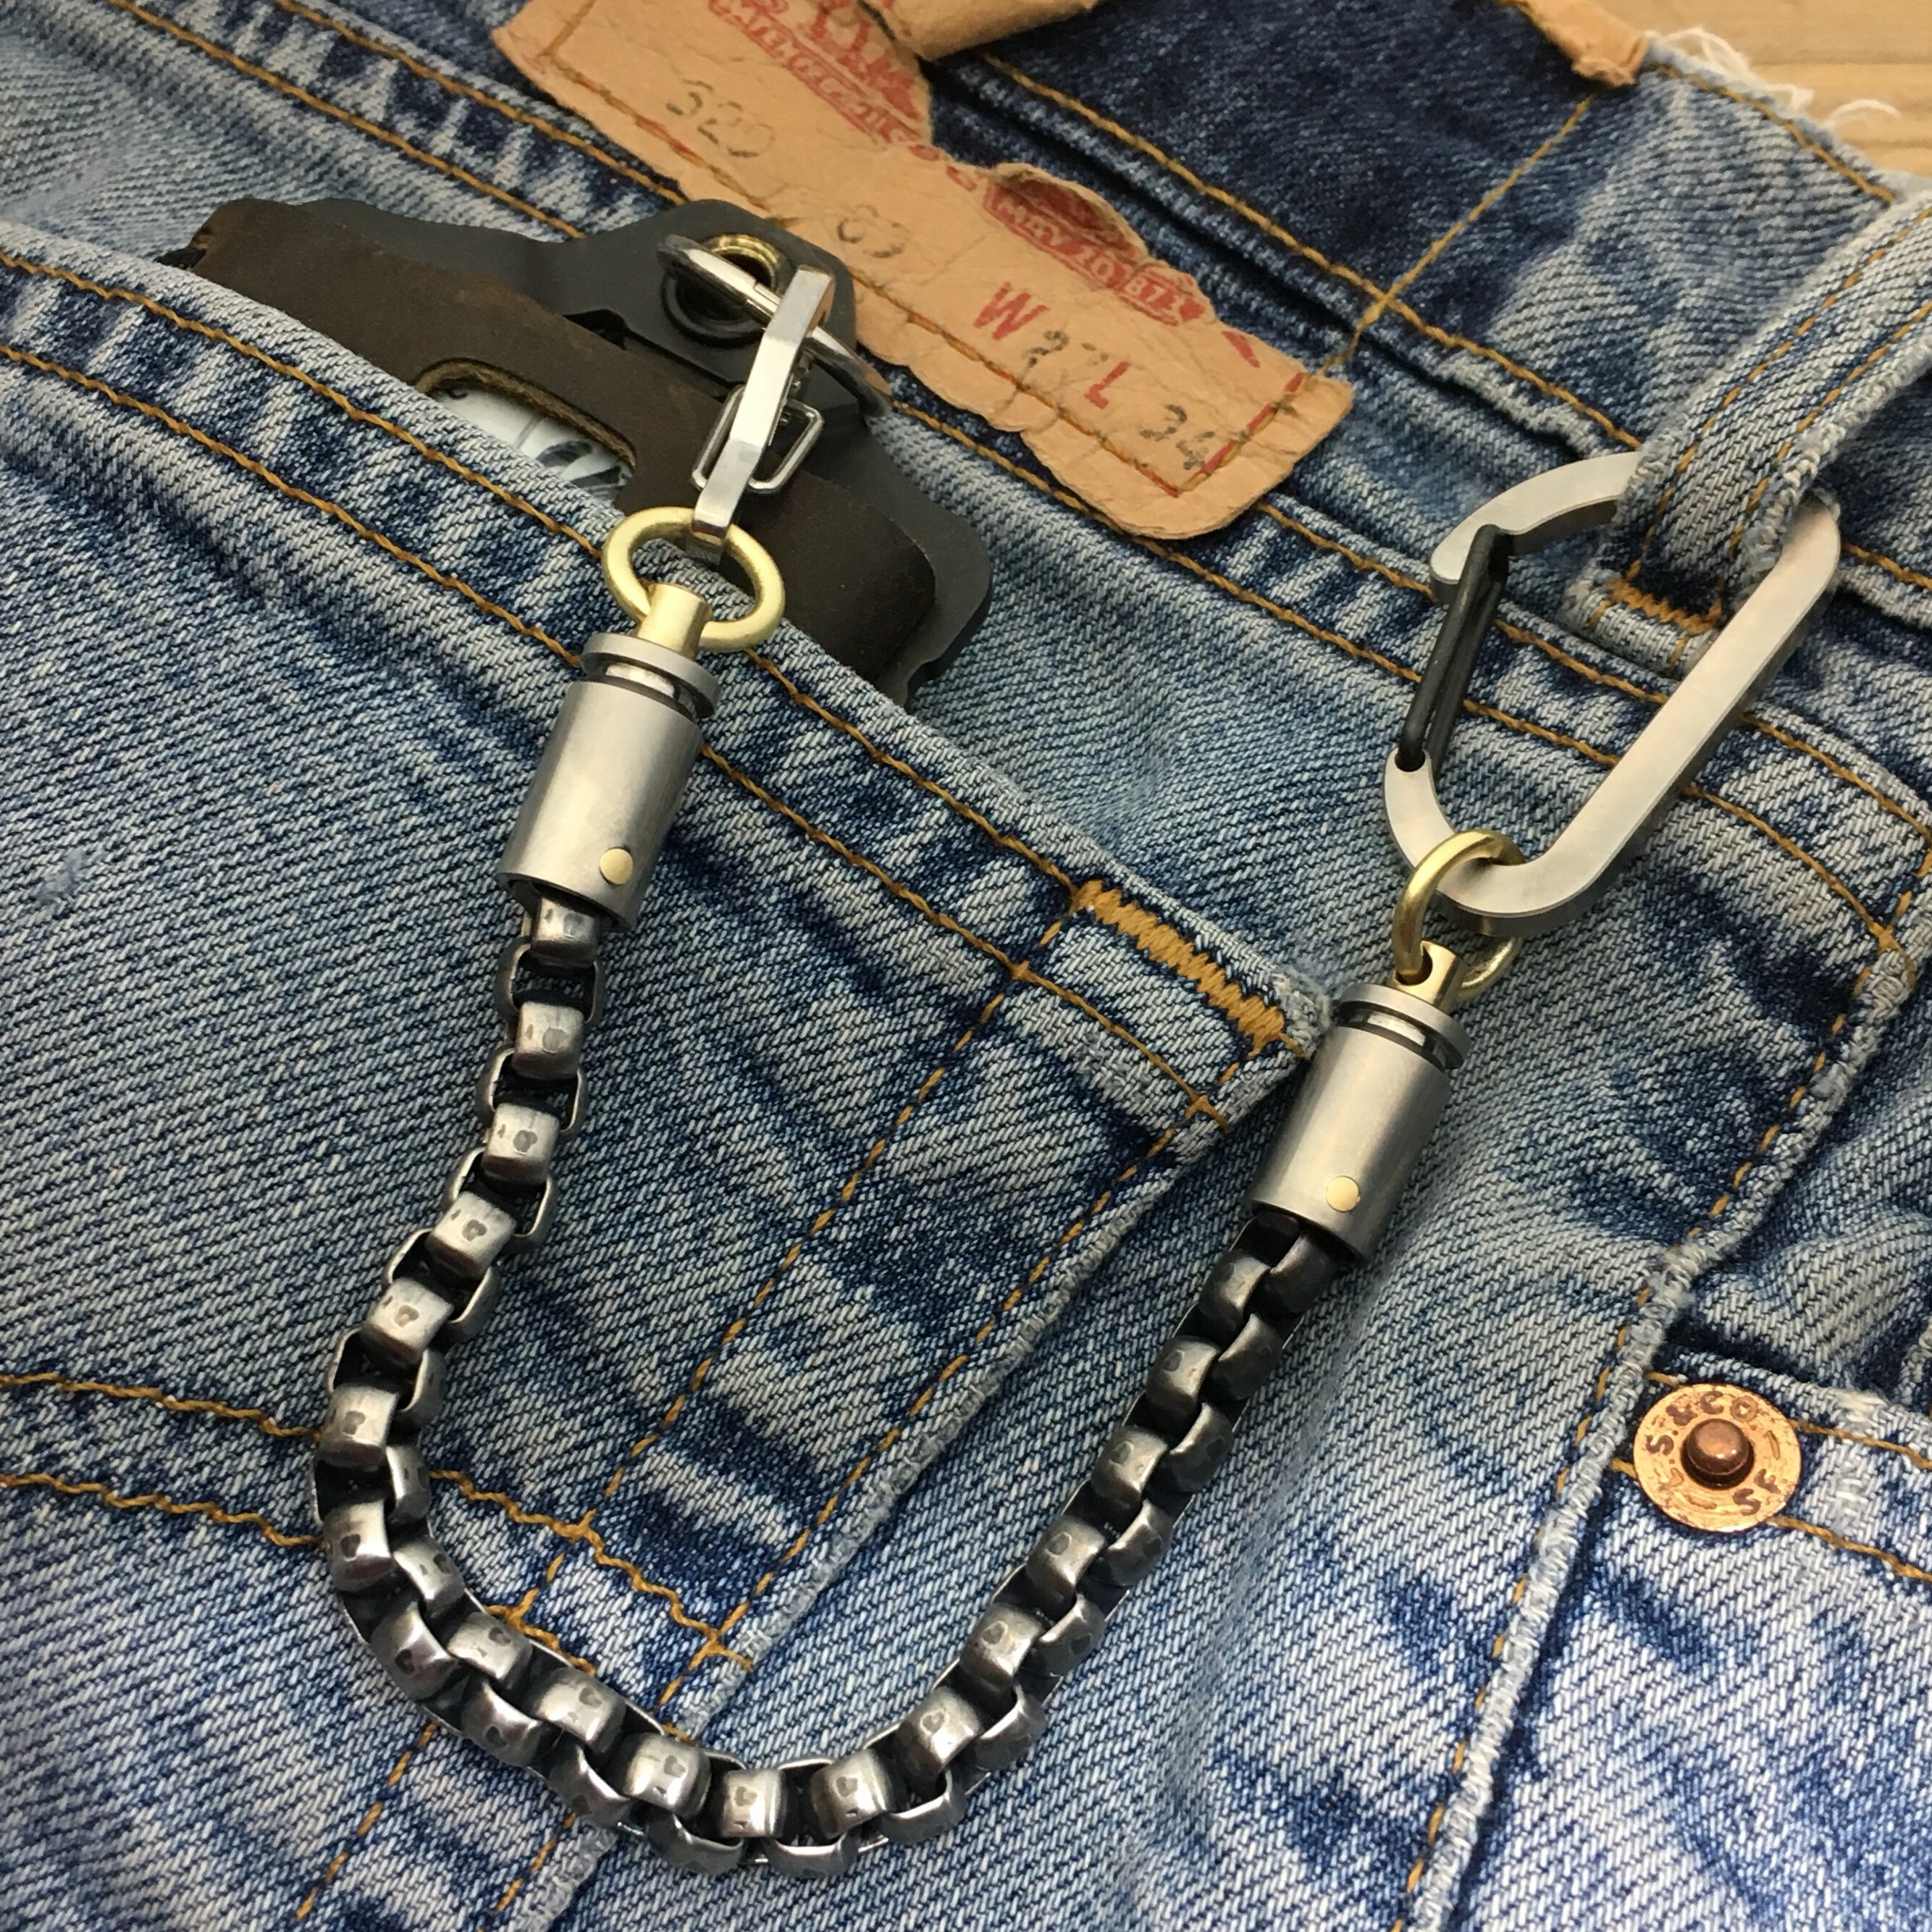 Cal.9mm Bracelet, Keychain or Wallet Chain / Natural